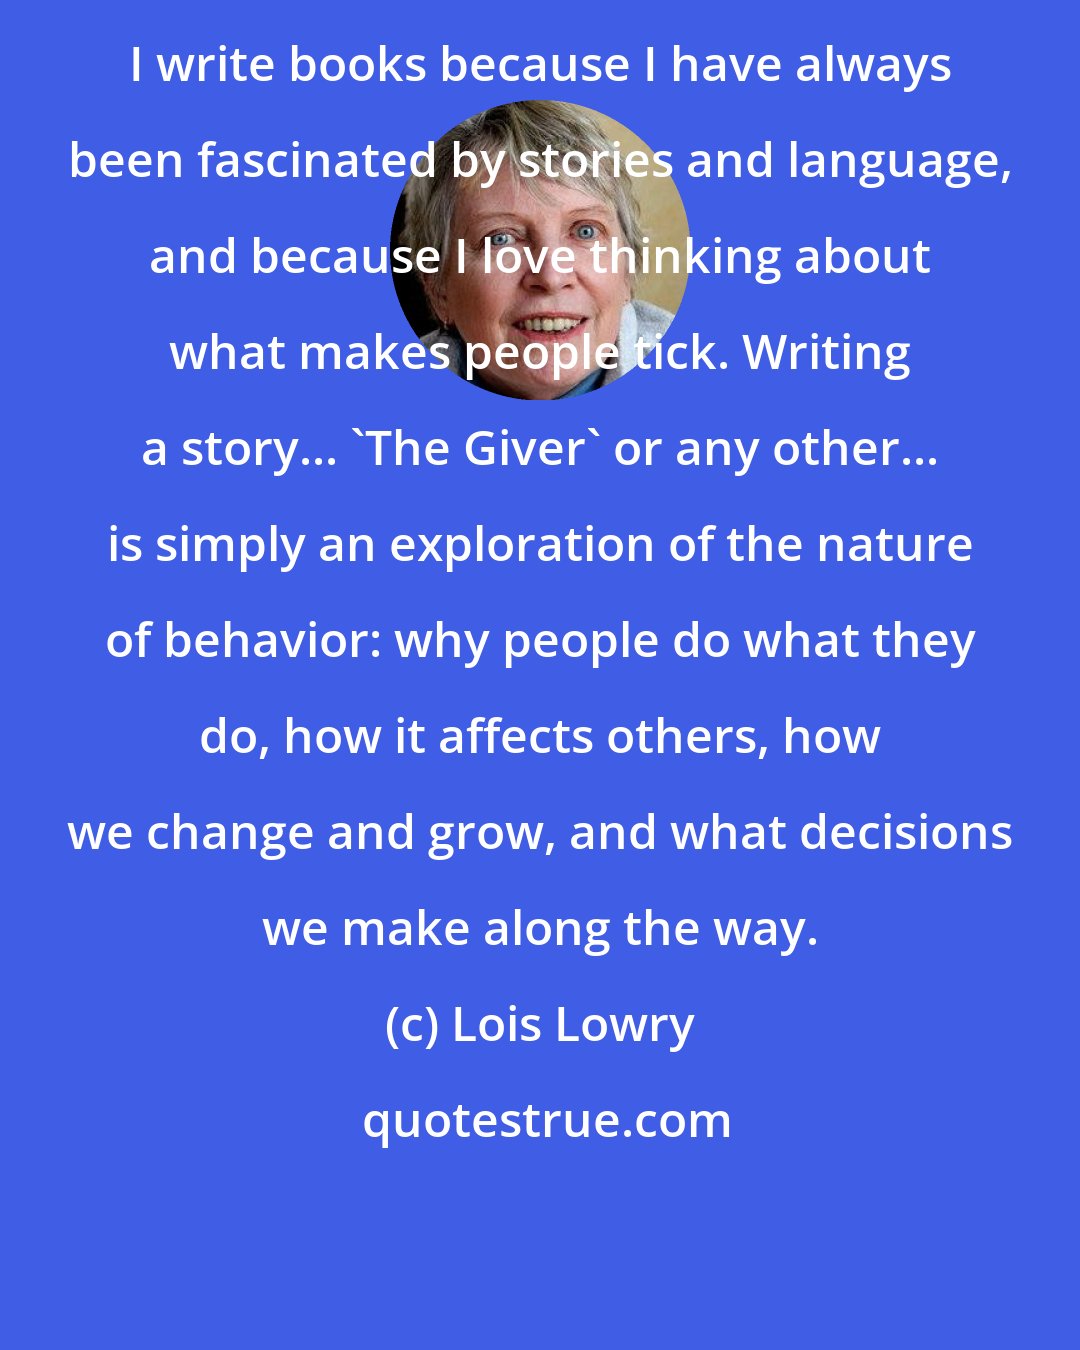 Lois Lowry: I write books because I have always been fascinated by stories and language, and because I love thinking about what makes people tick. Writing a story... 'The Giver' or any other... is simply an exploration of the nature of behavior: why people do what they do, how it affects others, how we change and grow, and what decisions we make along the way.